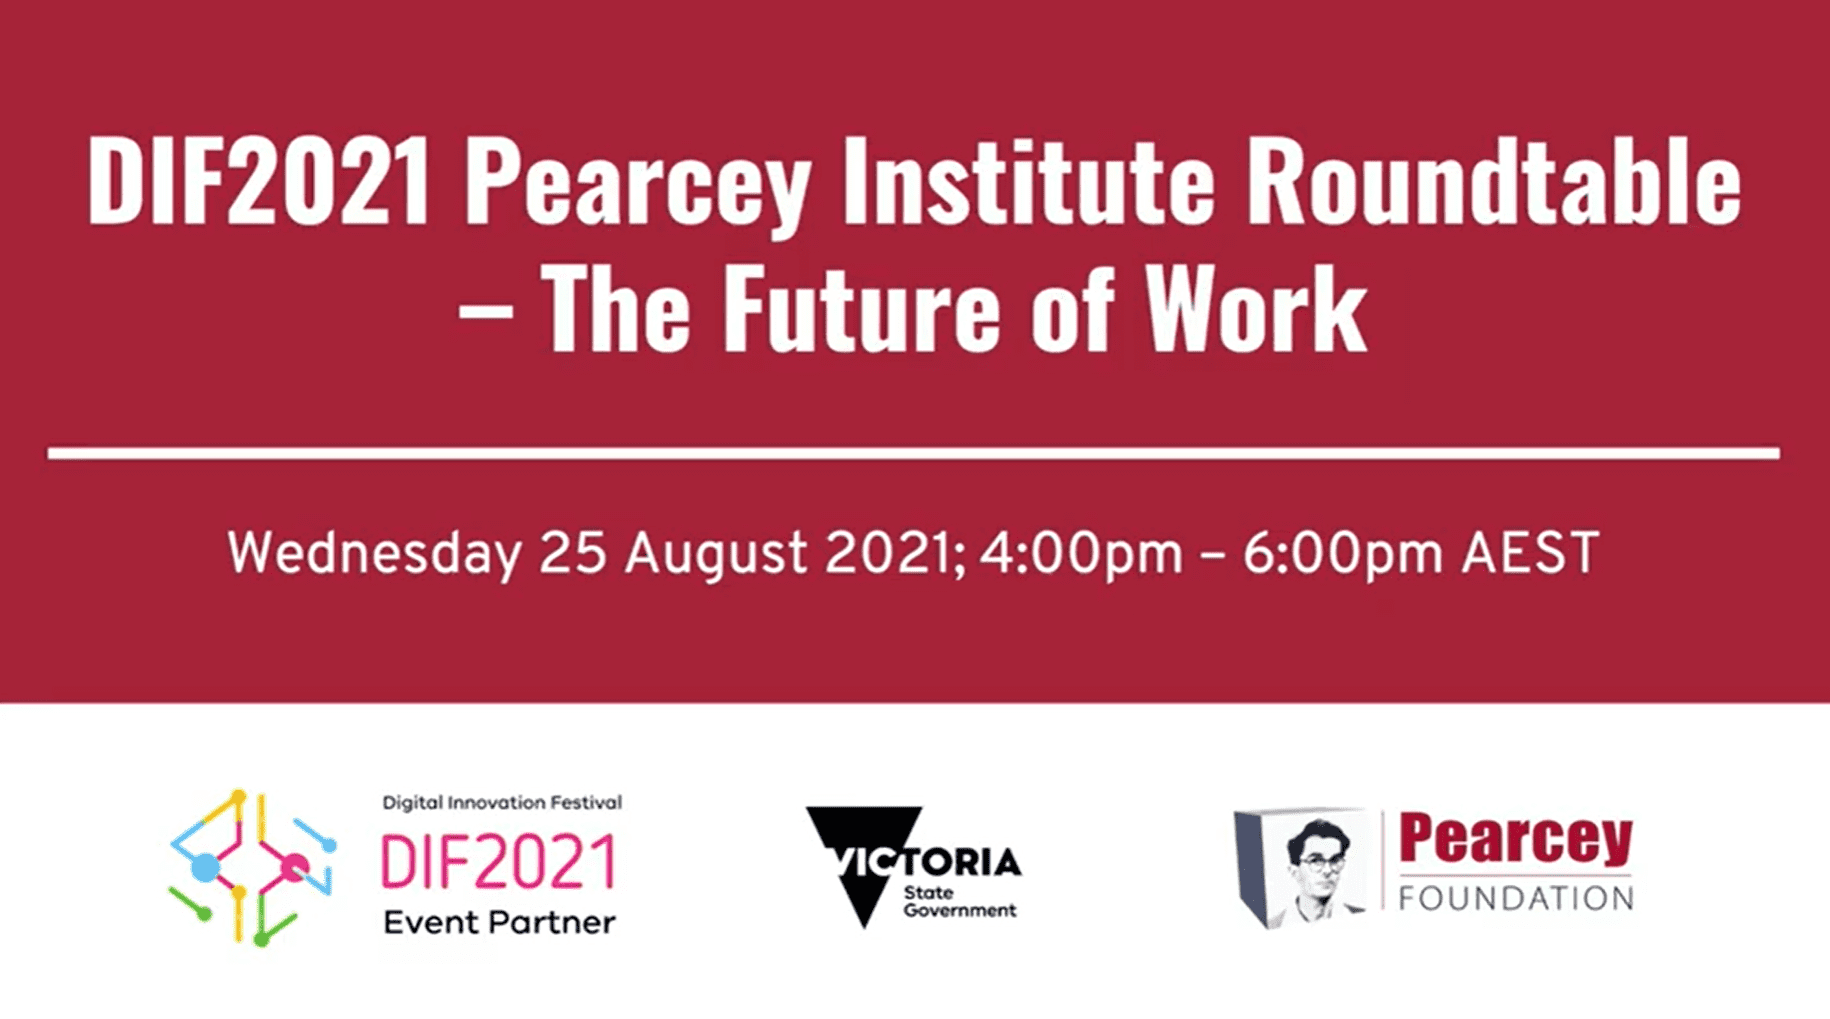 2021 The Future of Work Roundtable